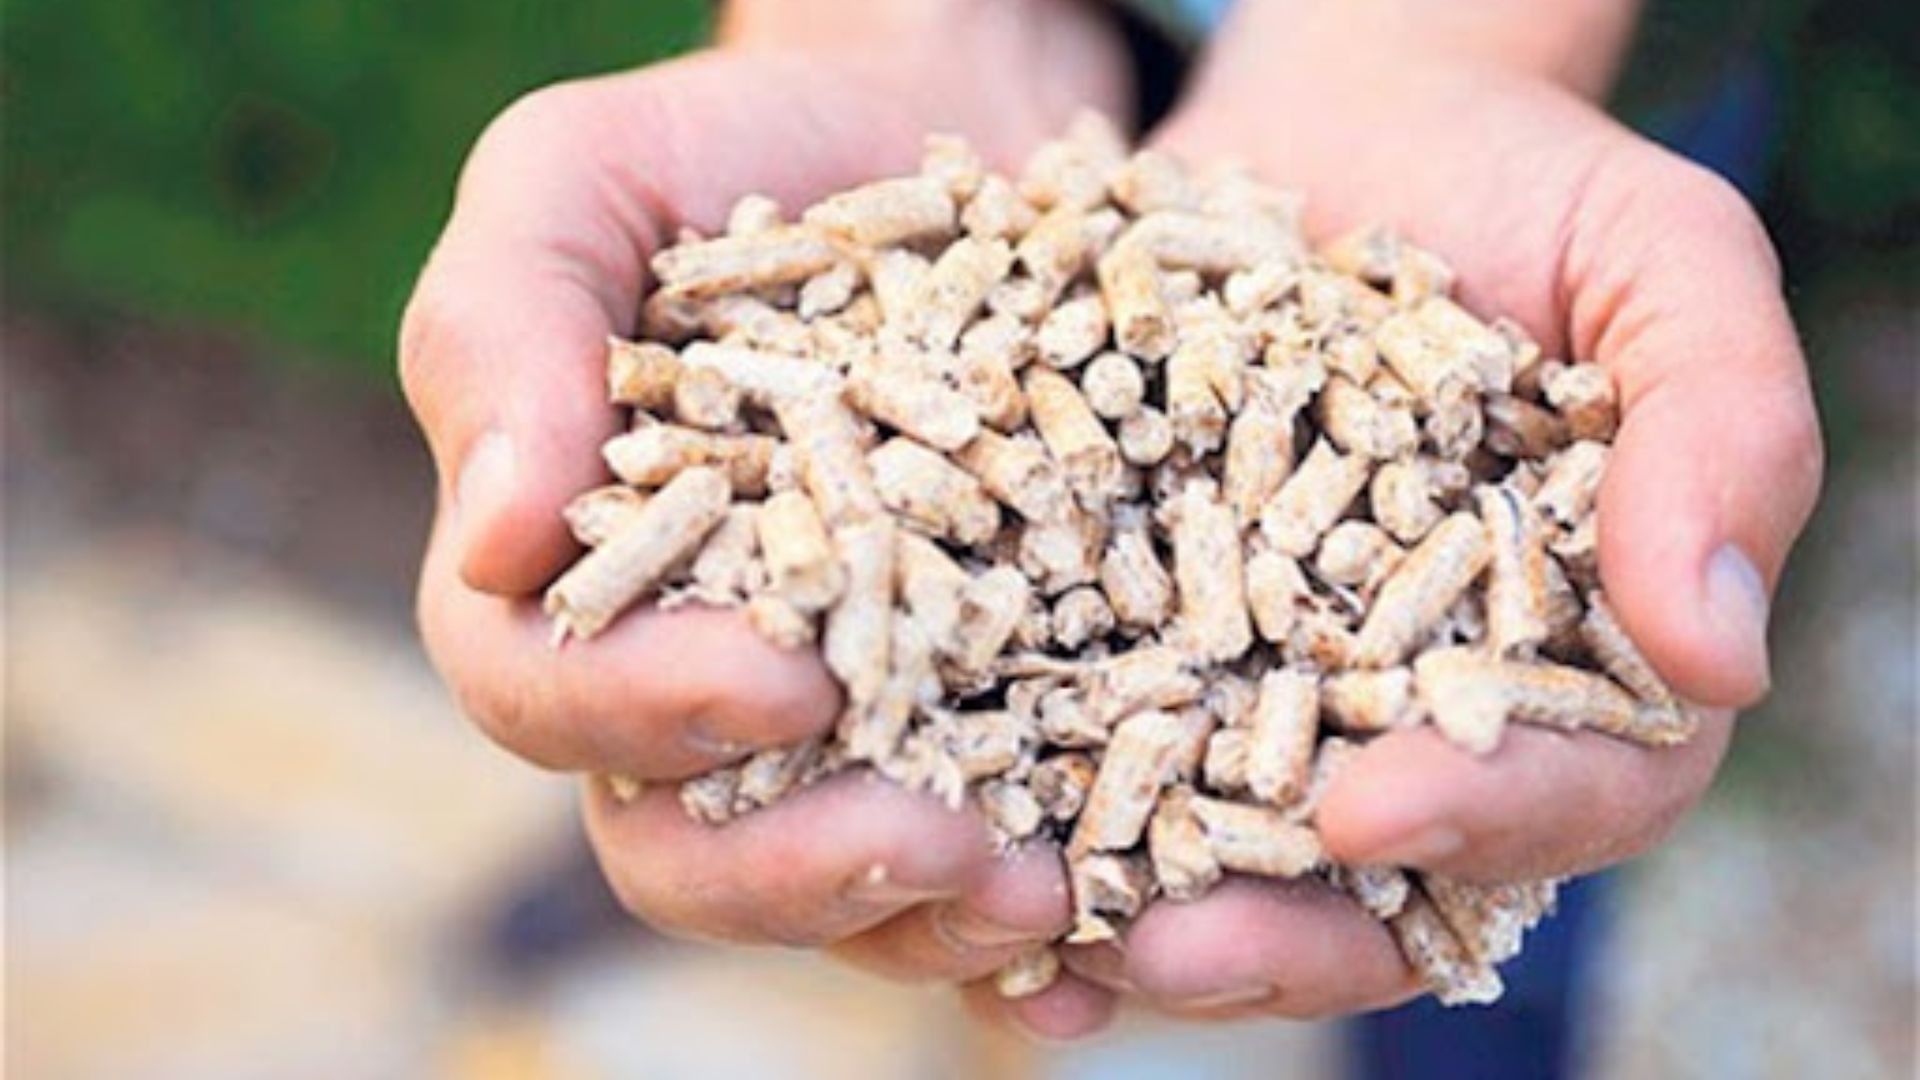 Wood Pellets Market Outlook: Anticipated 5.5% CAGR from 2022 to 2030